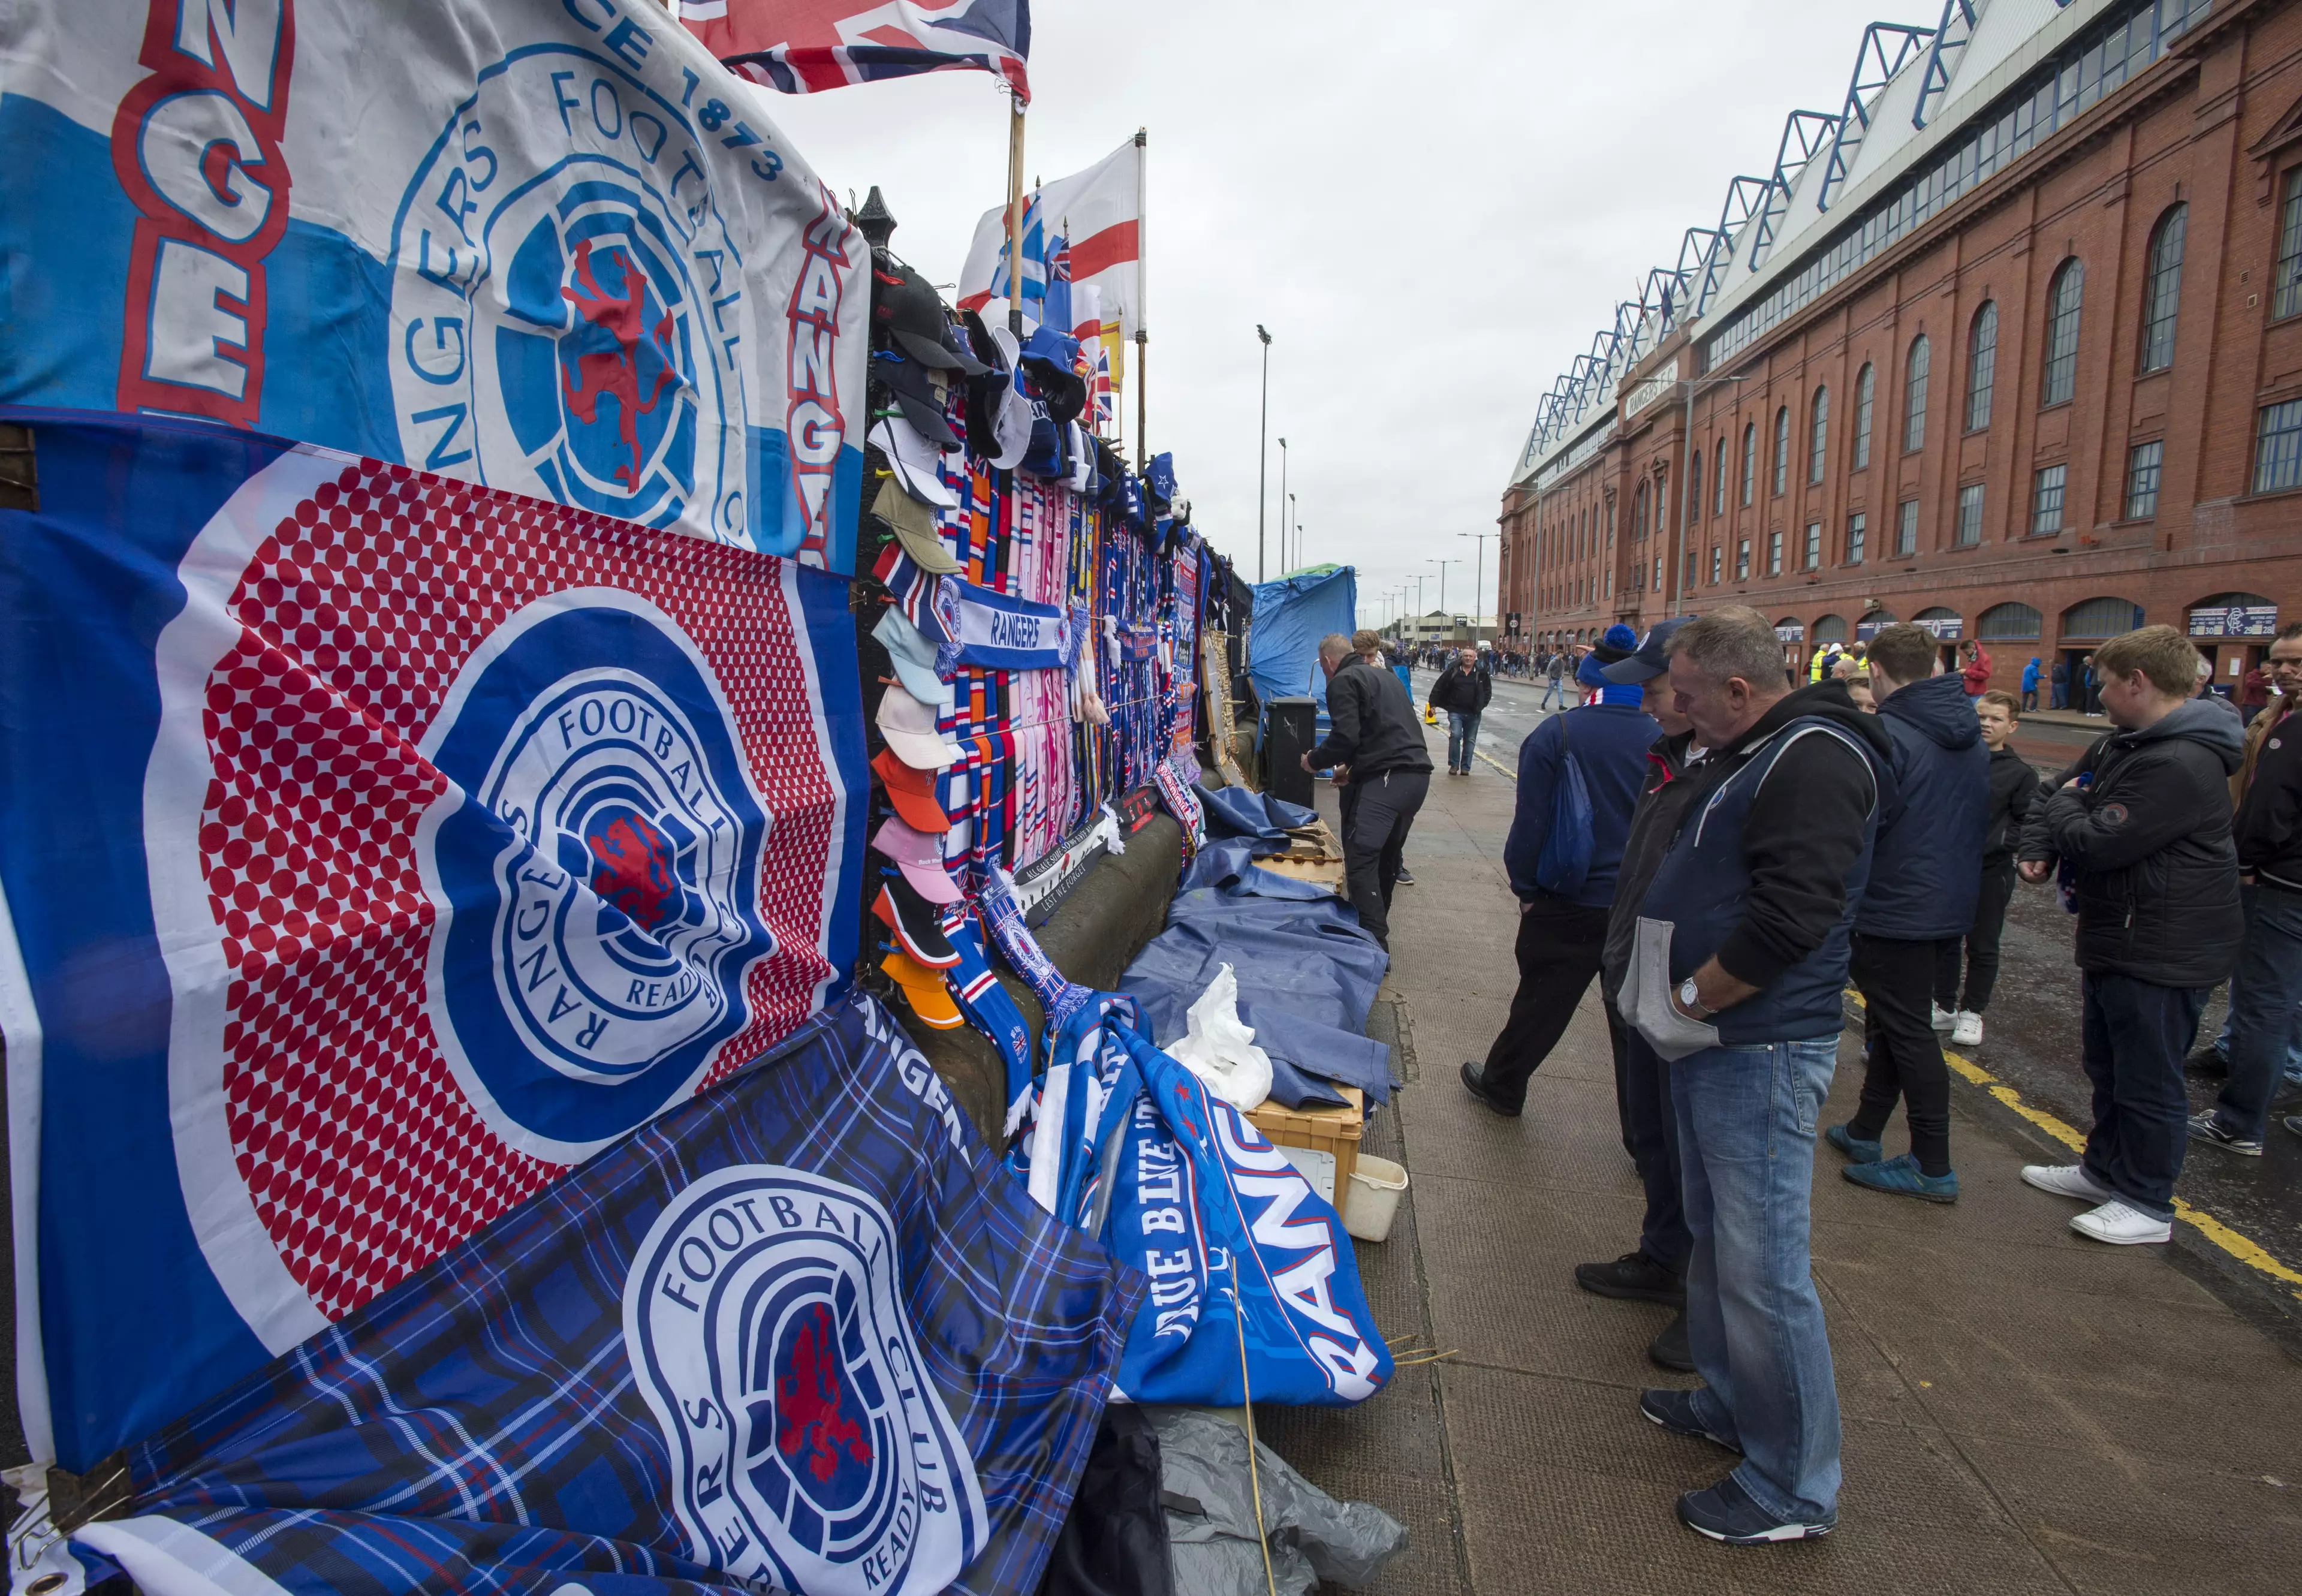 One Dead And 18 Hospitalised After Glasgow Rangers Fans Bus Crash